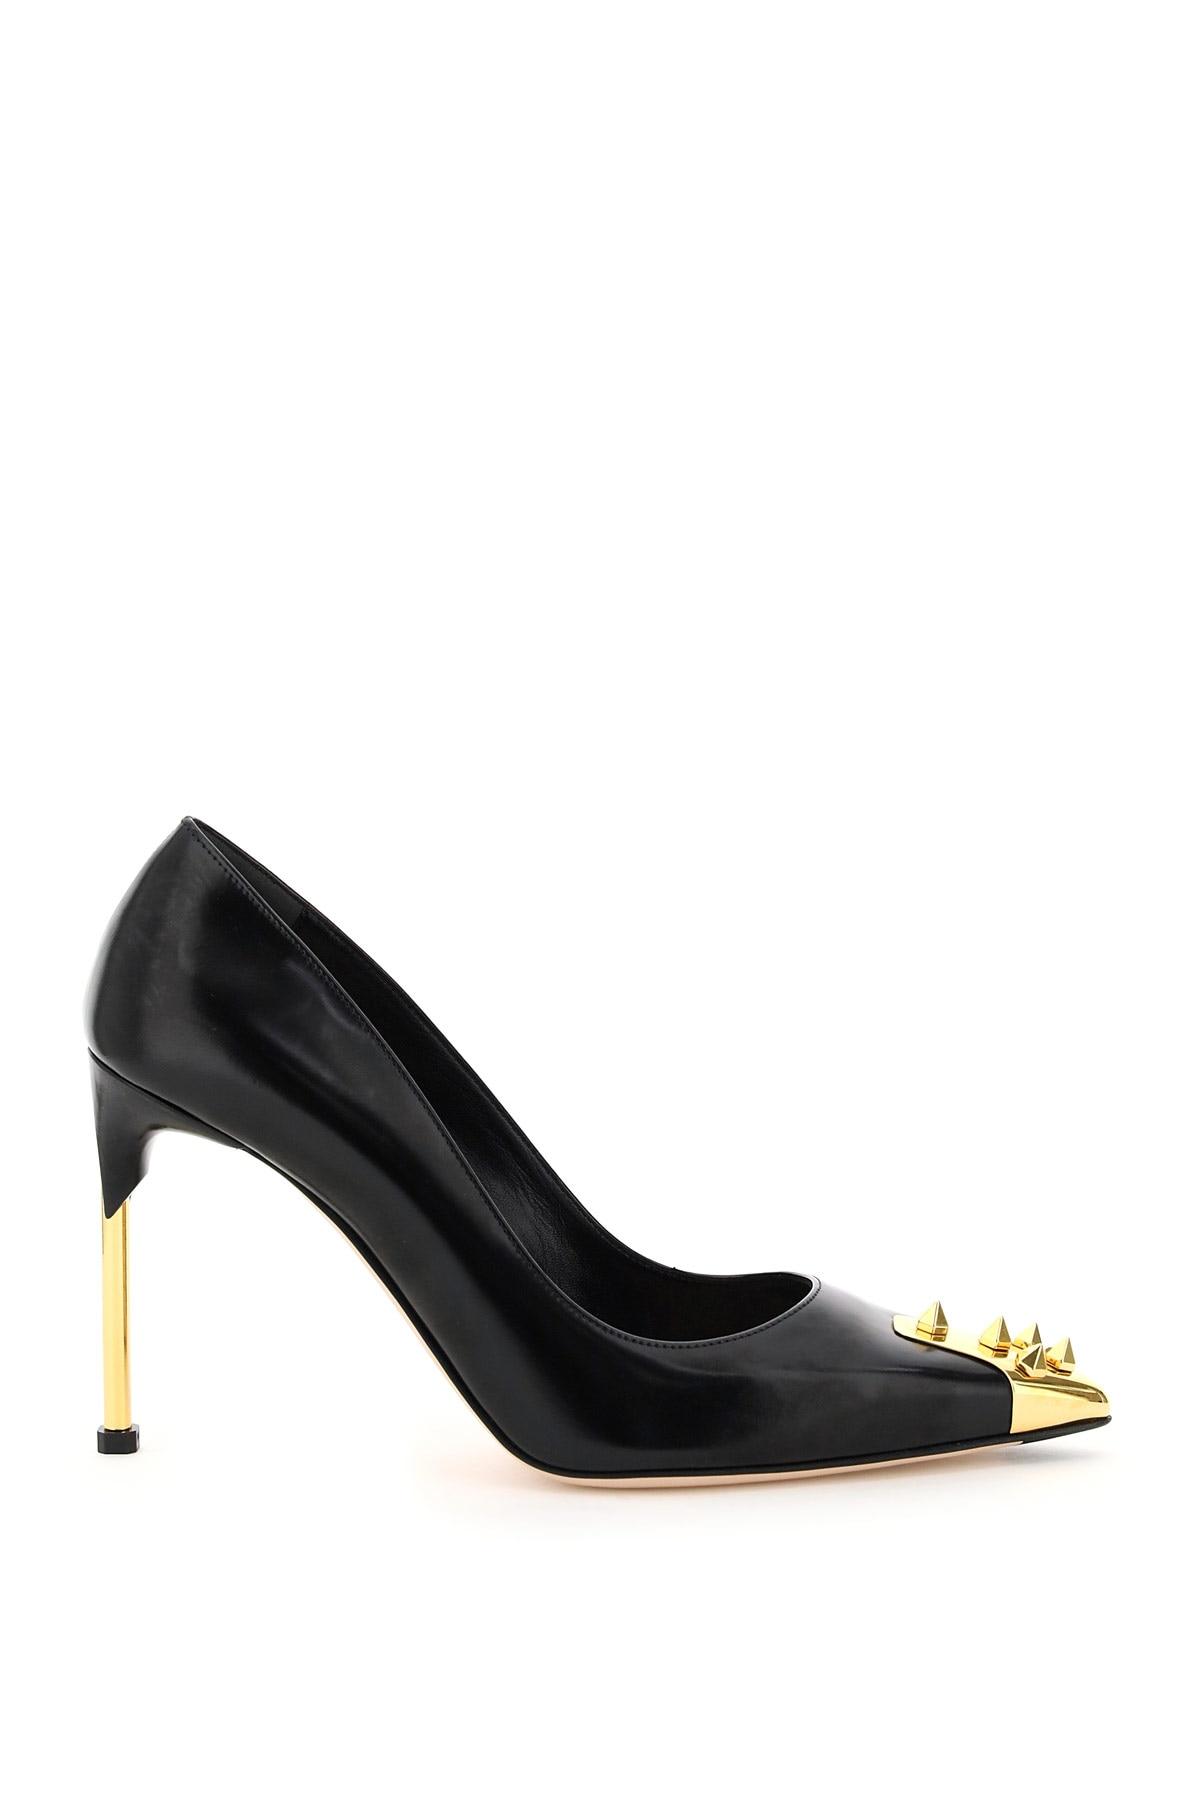 Alexander McQueen Leather Pumps With Studs in Black,Gold (Black) - Lyst